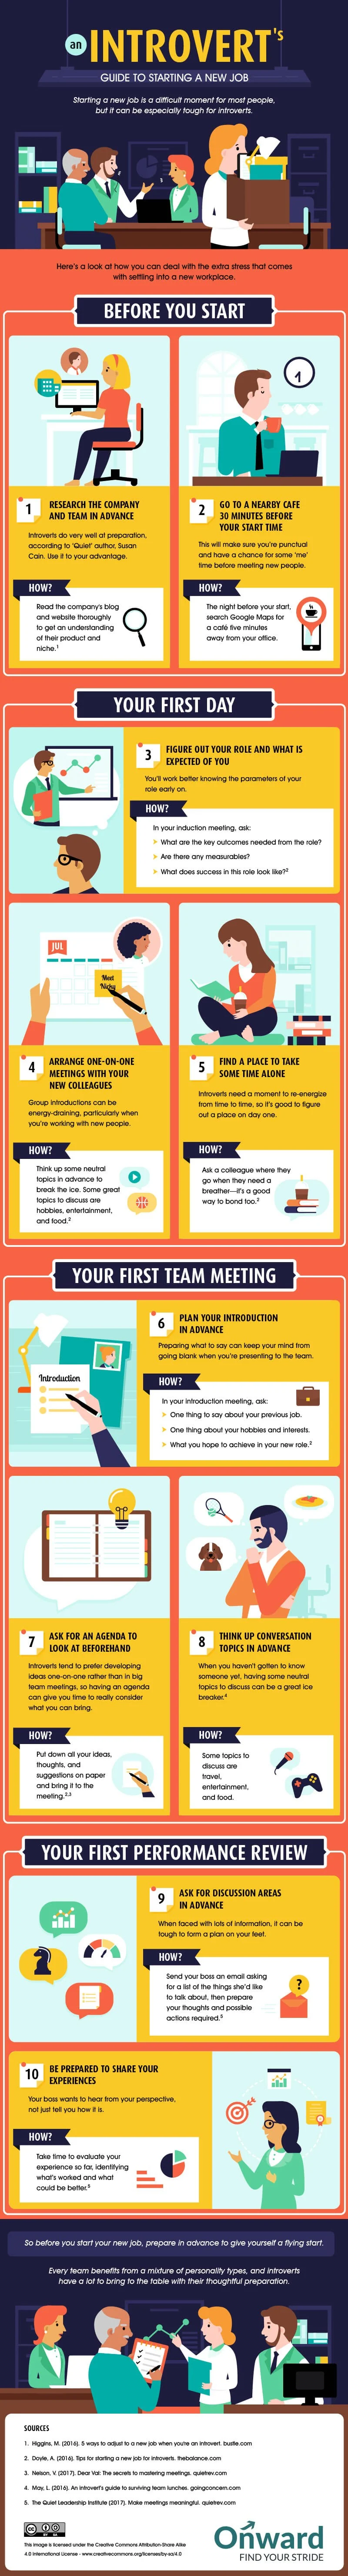 An Introvert’s Guide to Starting A New Job - #infographic